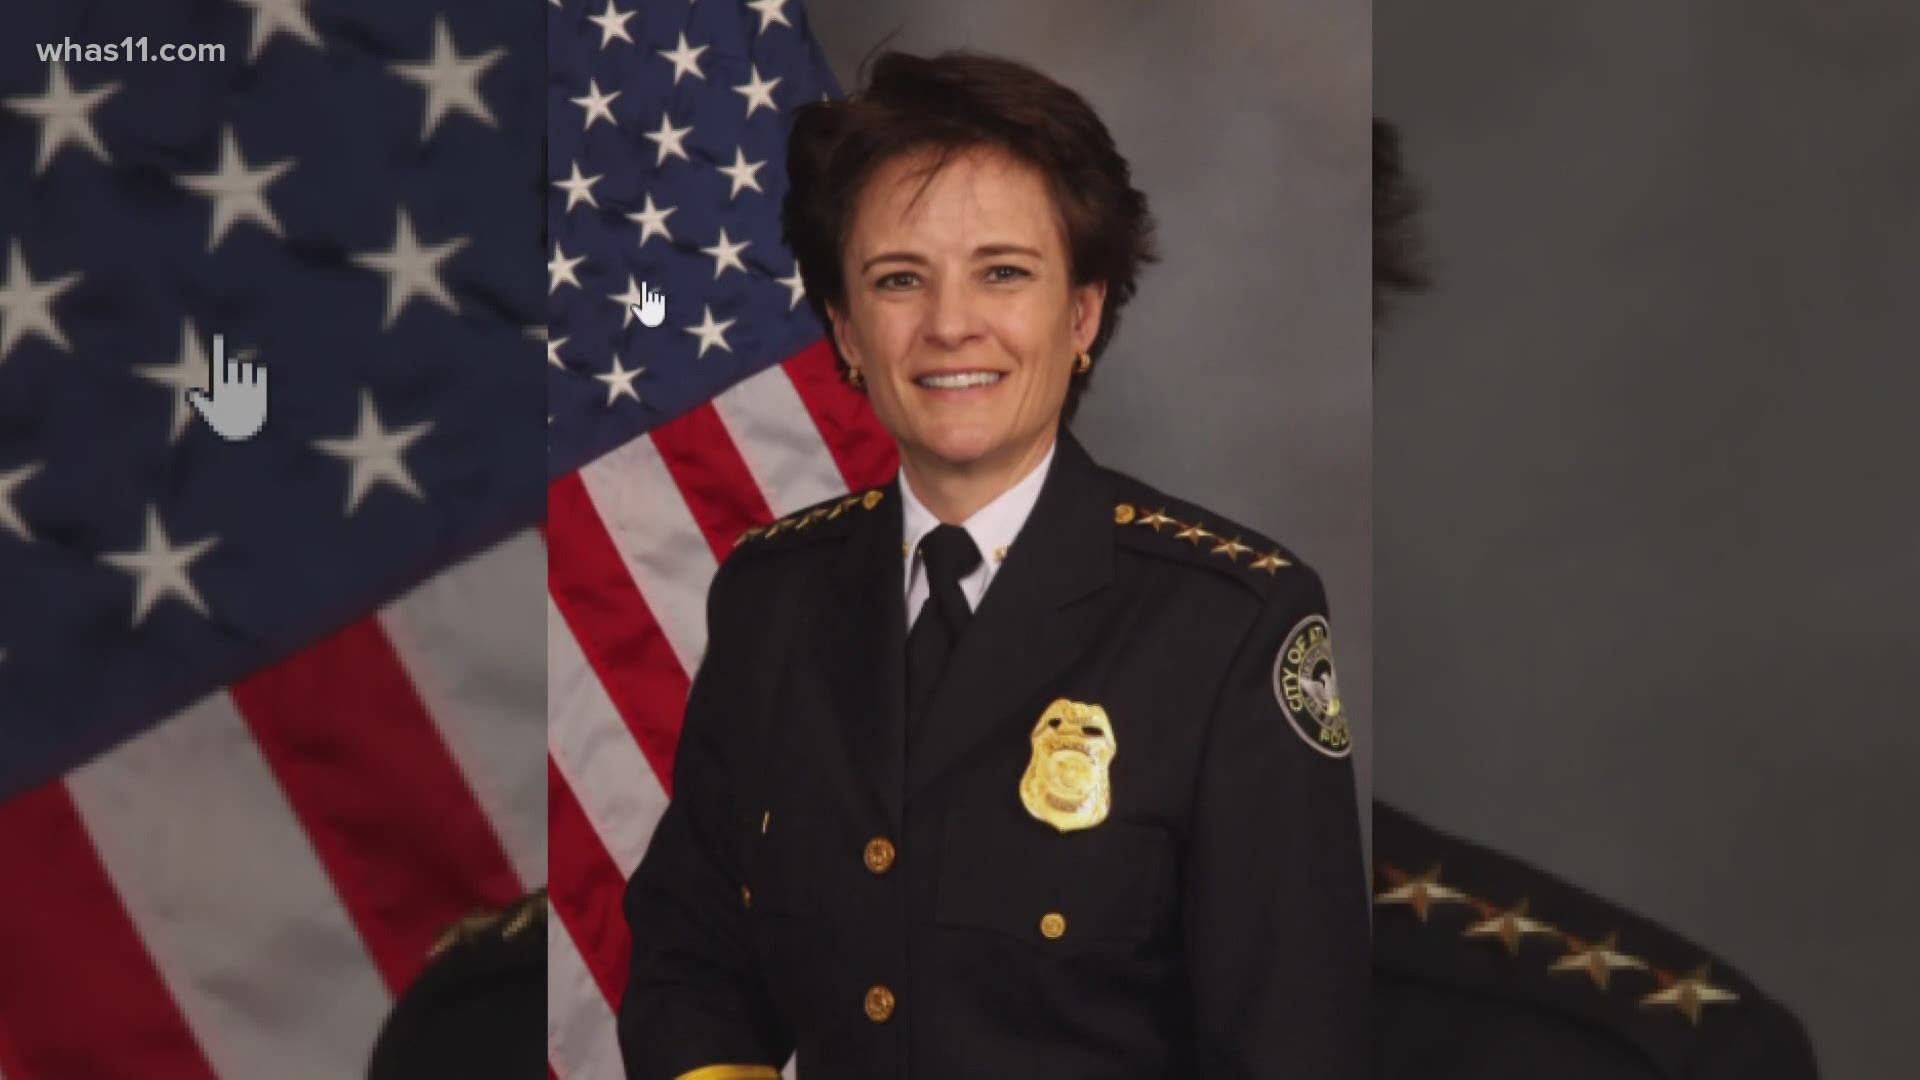 Not everyone agrees with Erika Shields as Louisville's new police chief. For some, it's because of Rayshard Brooks' death.